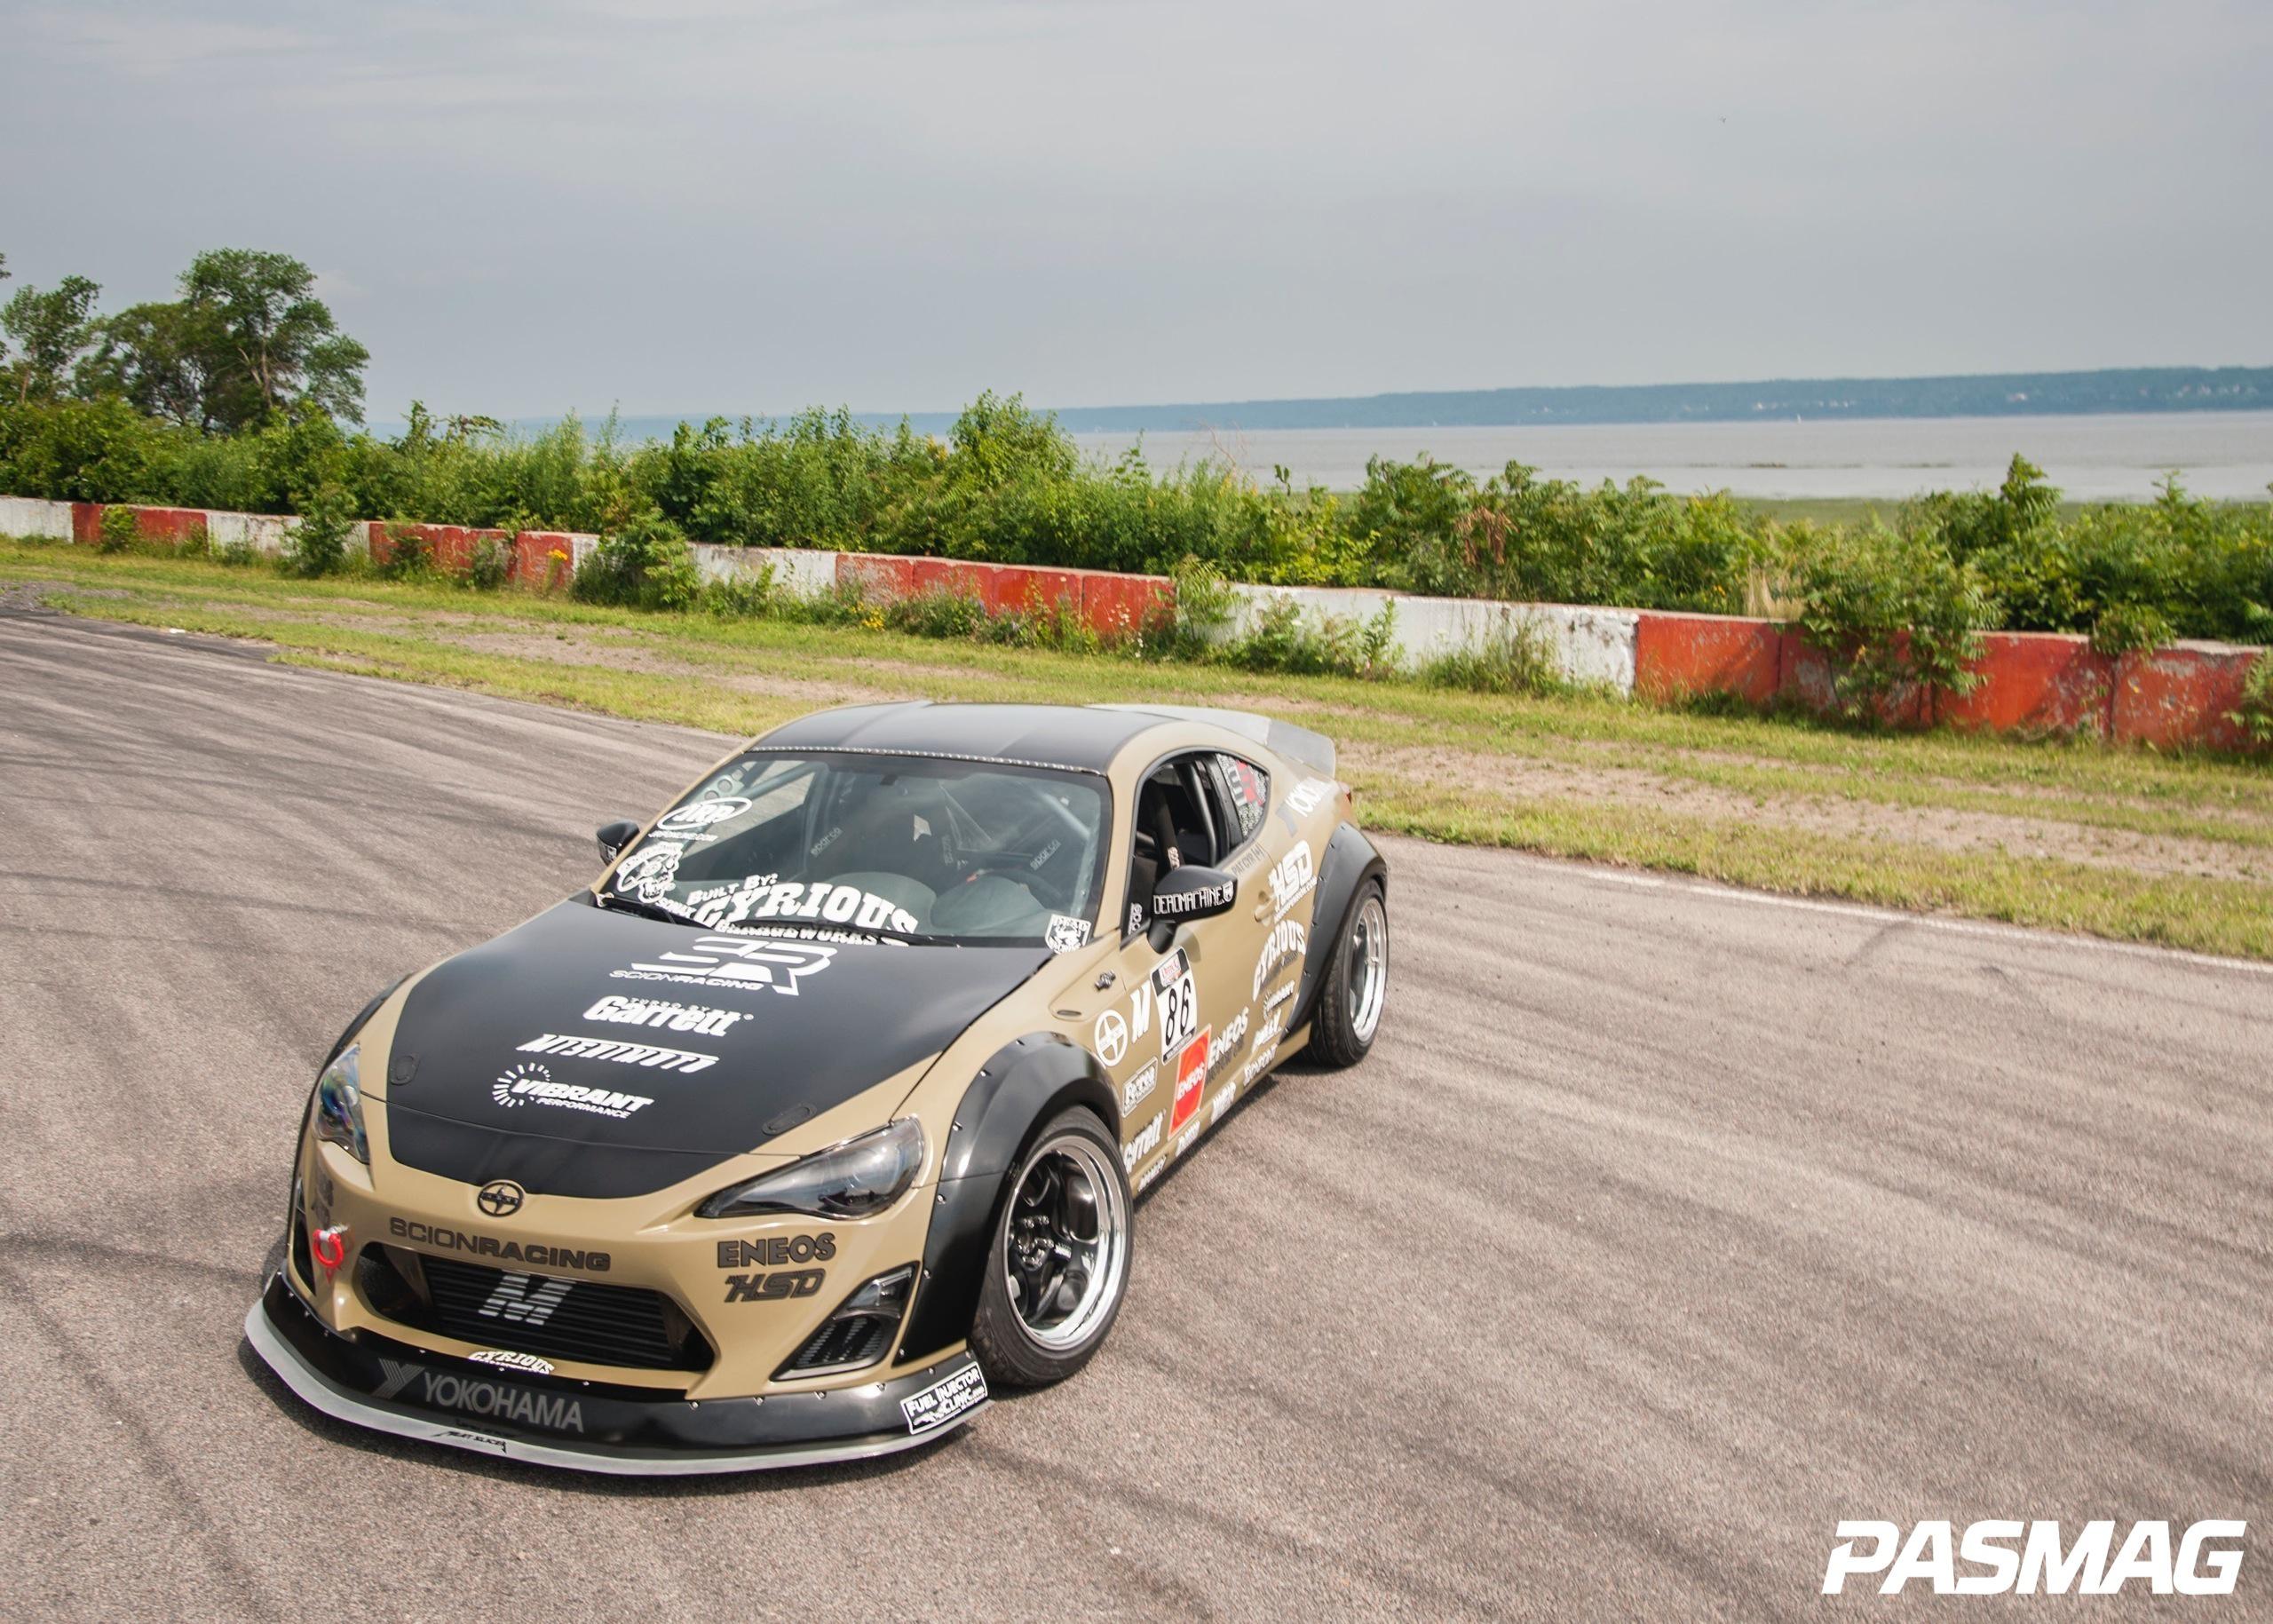 Monster in the Making: Pat Cyr's 2013 Scion FR-S